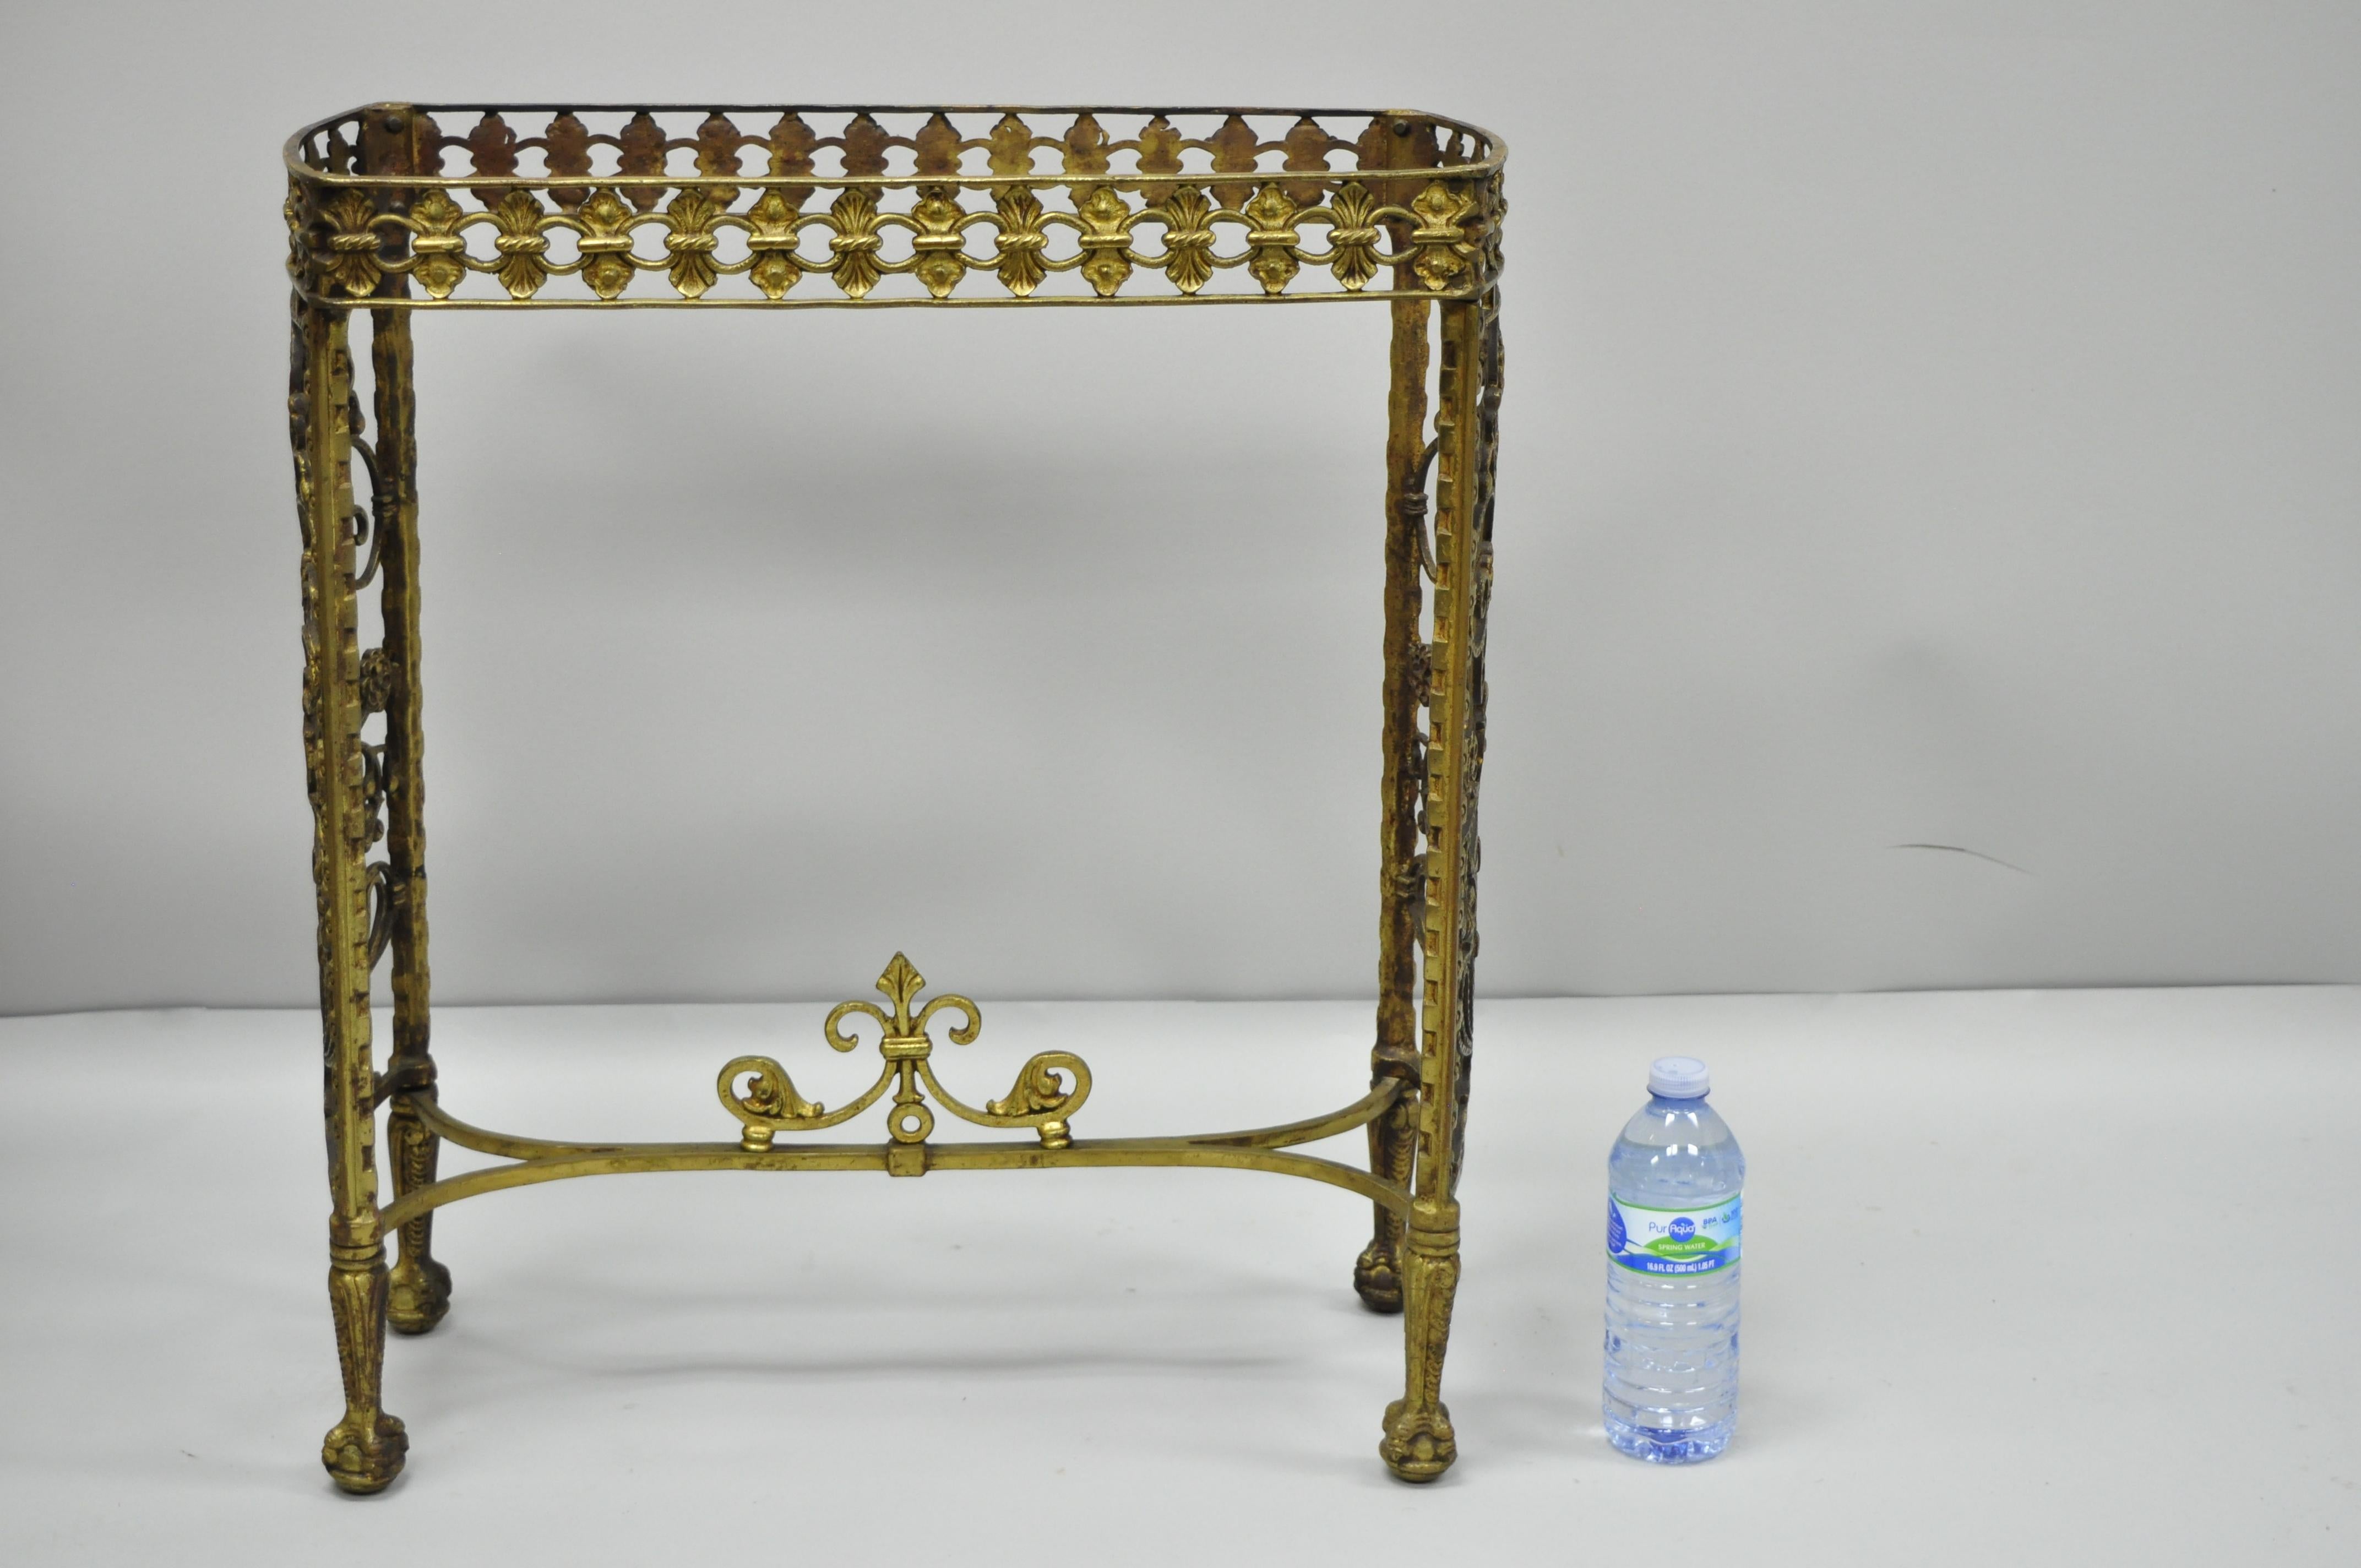 Antique French Art Nouveau/Victorian brass small side table base. Item features ball and claw feet, ornate floral scrollwork, etched floral bouquet and urn pattern to sides, solid brass construction, quality craftsmanship, and great style and form,